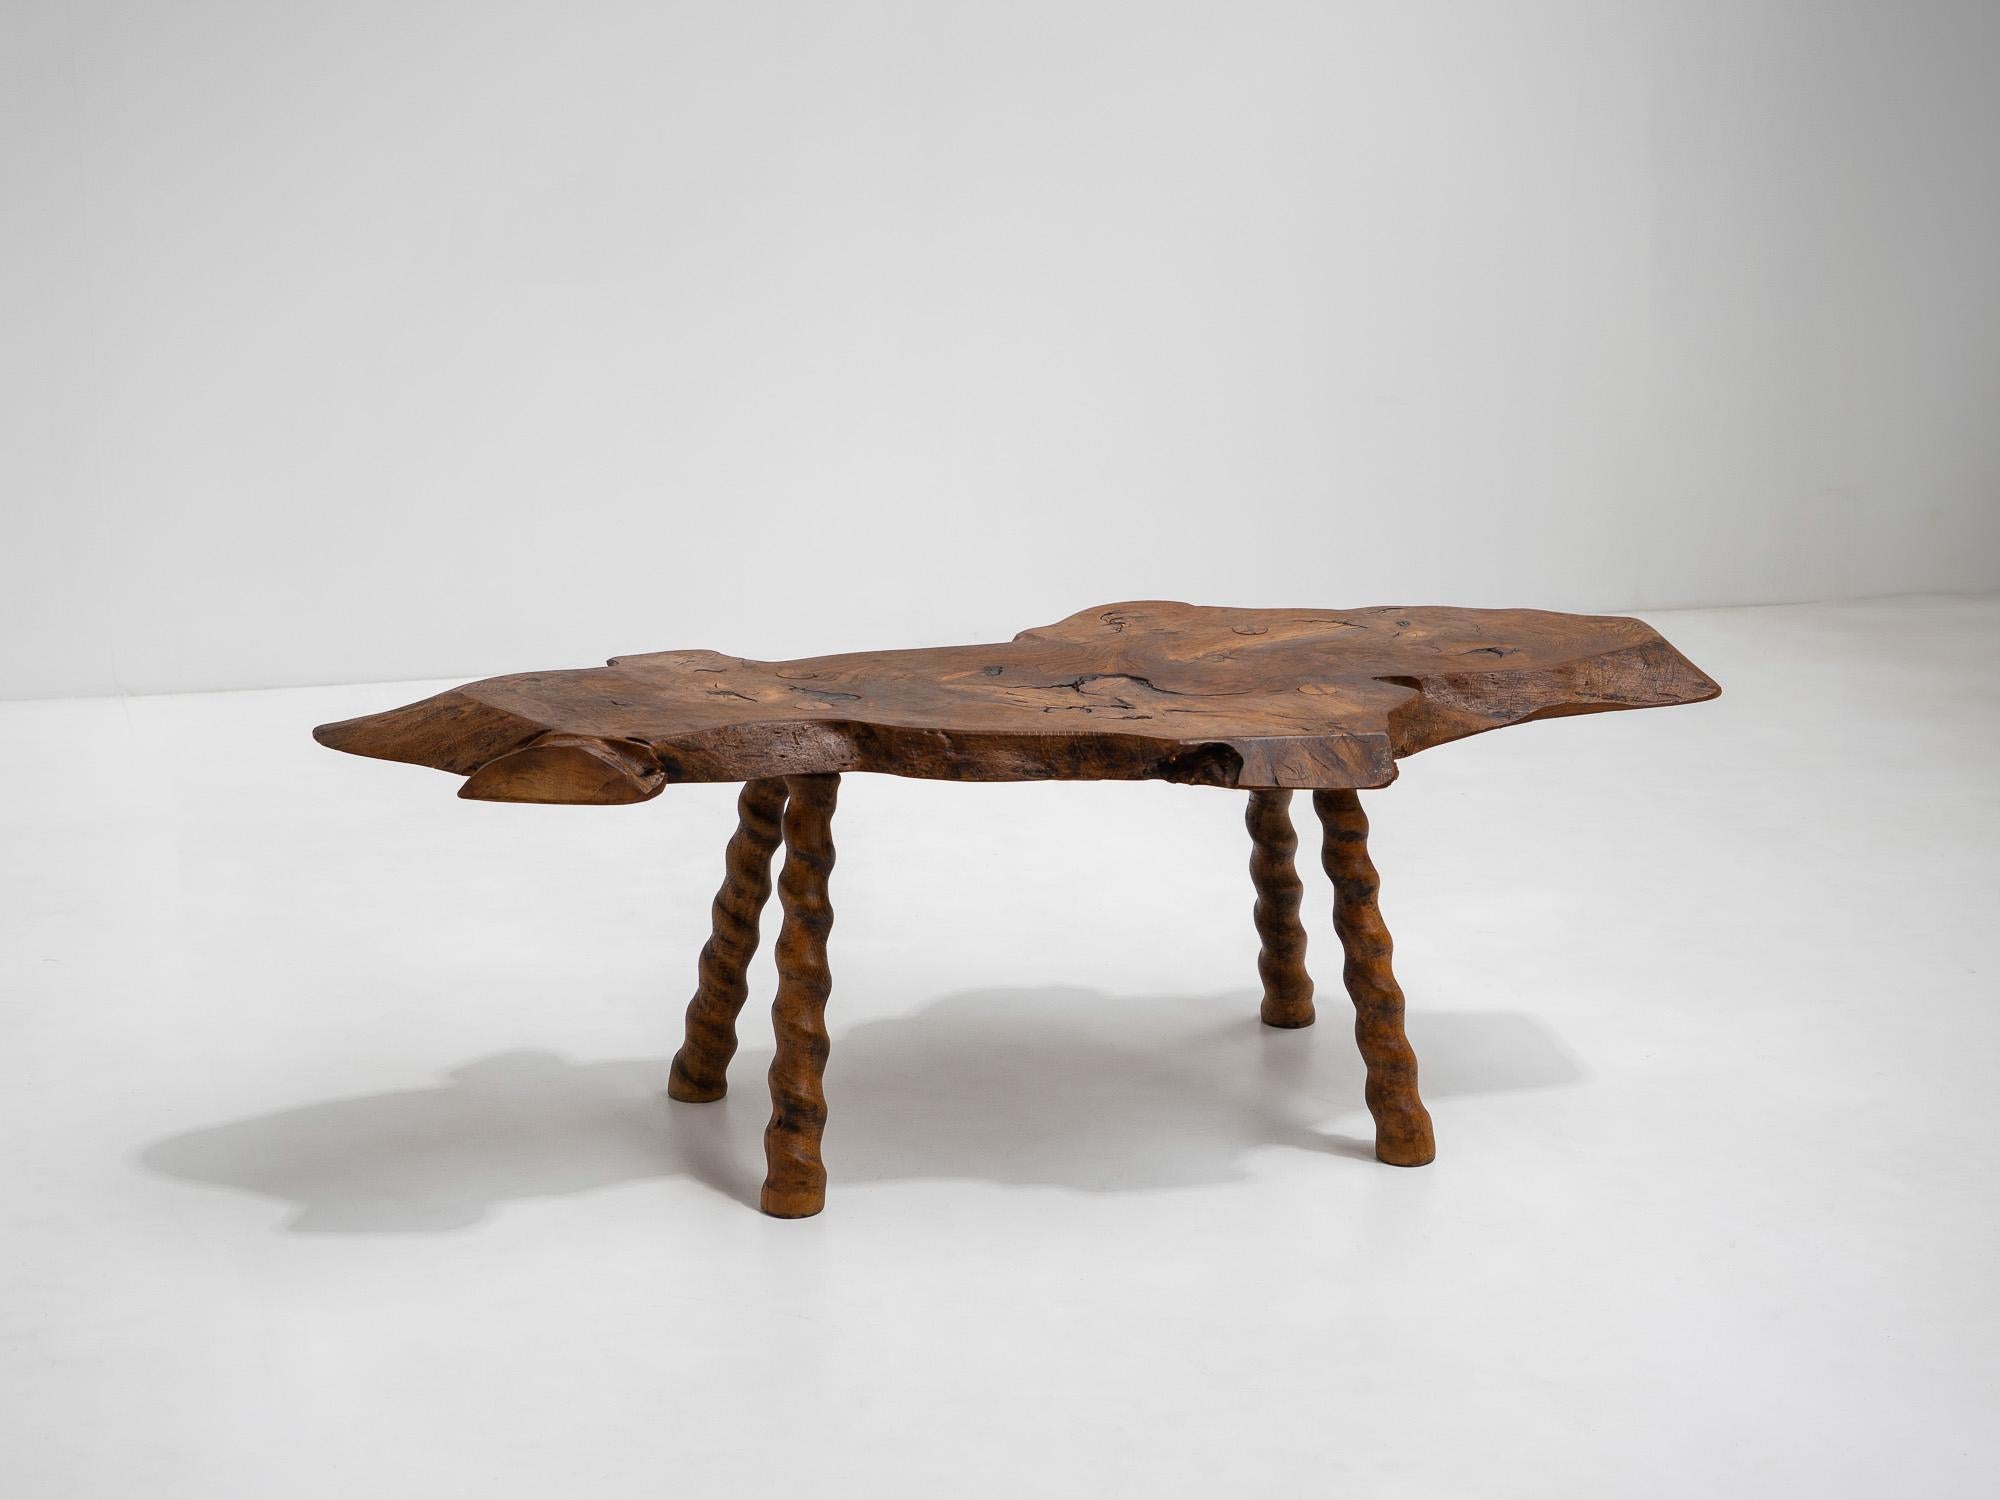 This breathtaking, one-of-a-kind wabi-sabi table has been sourced from the South of France and dates back to the 1950s. It has the perfect balance between sophistication and quirkiness, thanks to its twisted legs. The top of the table features a